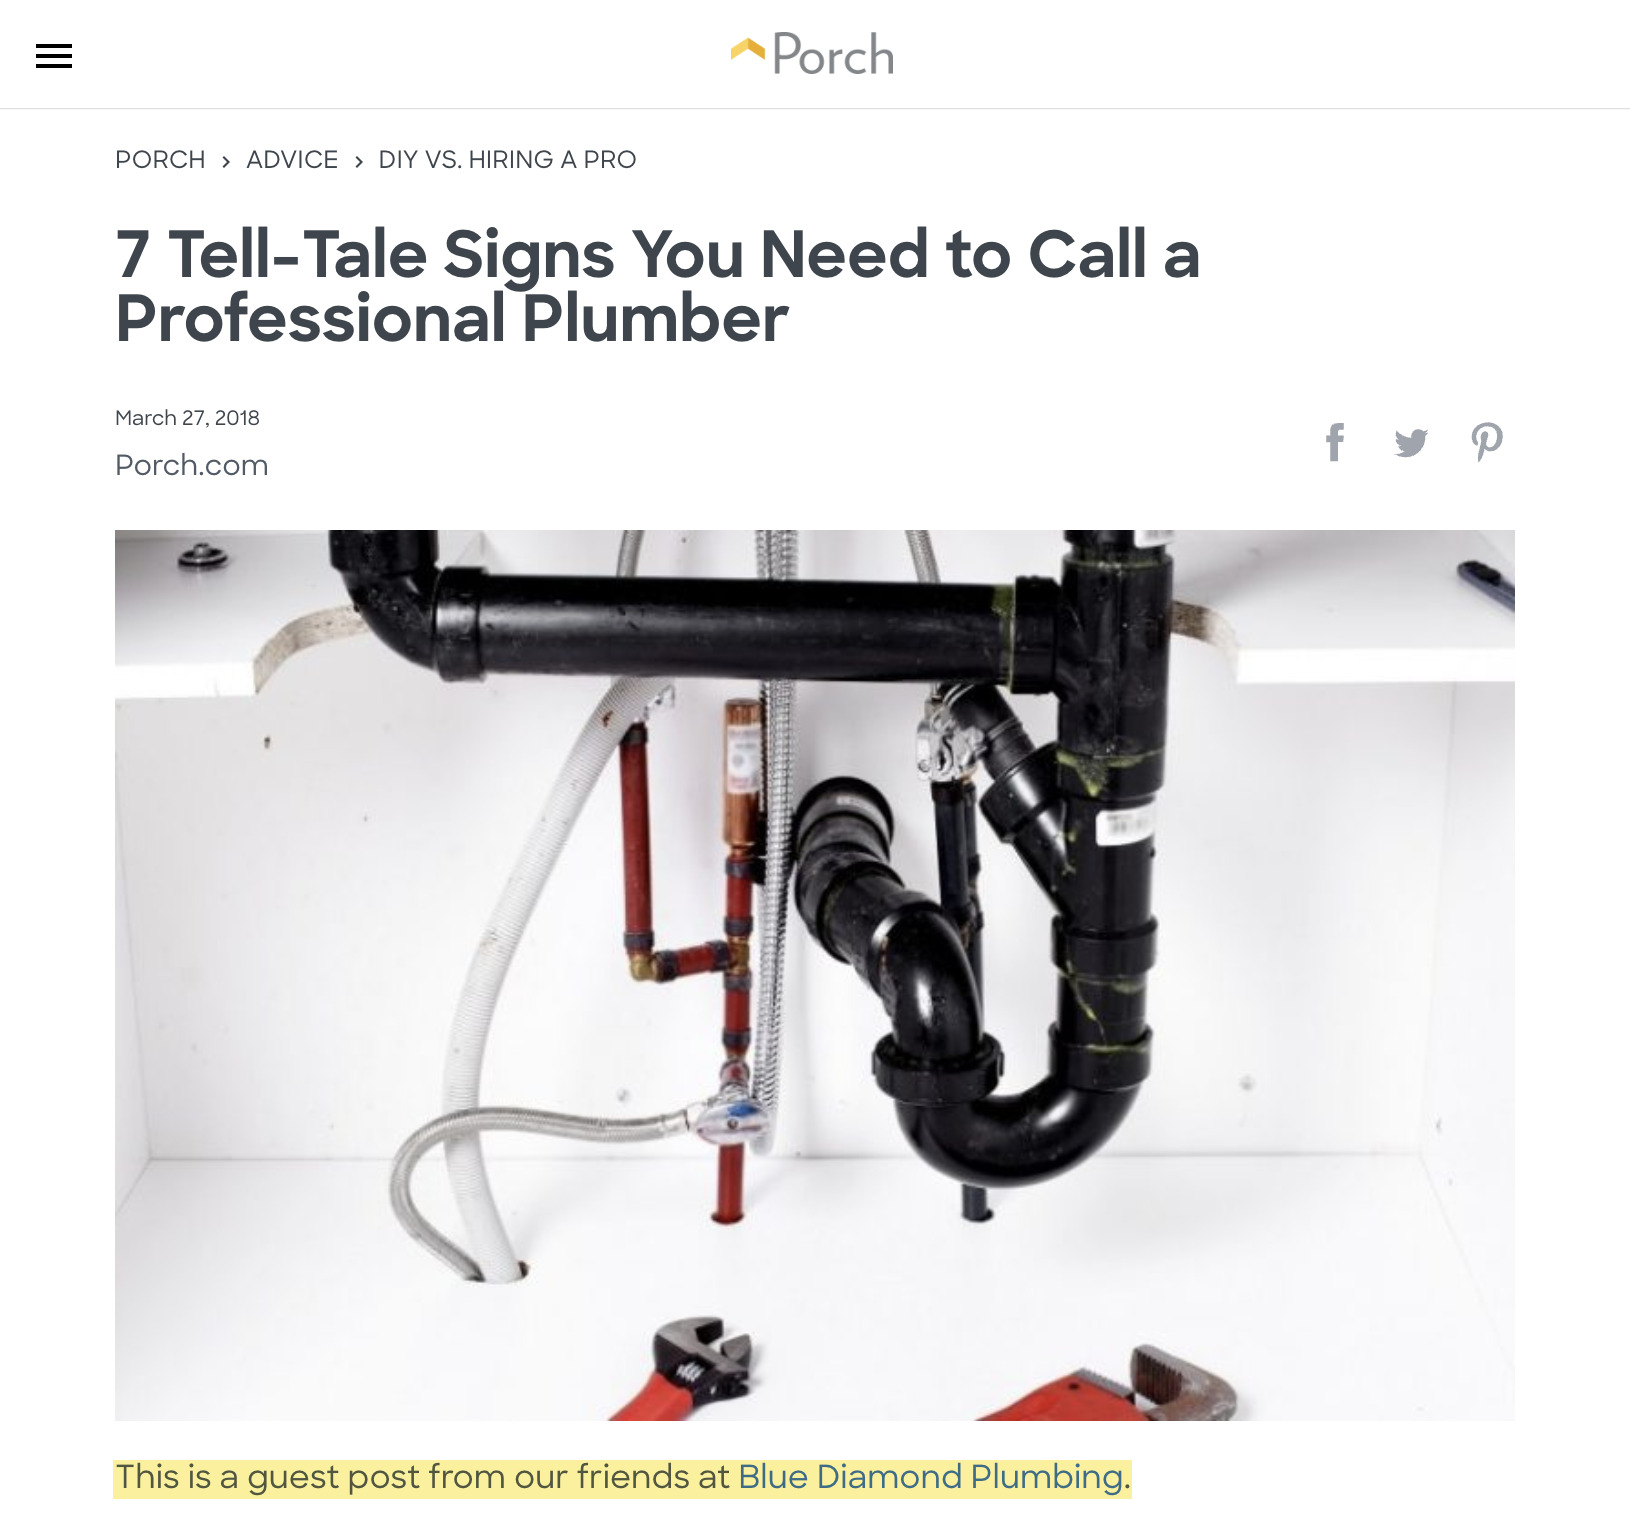 Example of a guest post by a plumbing company
